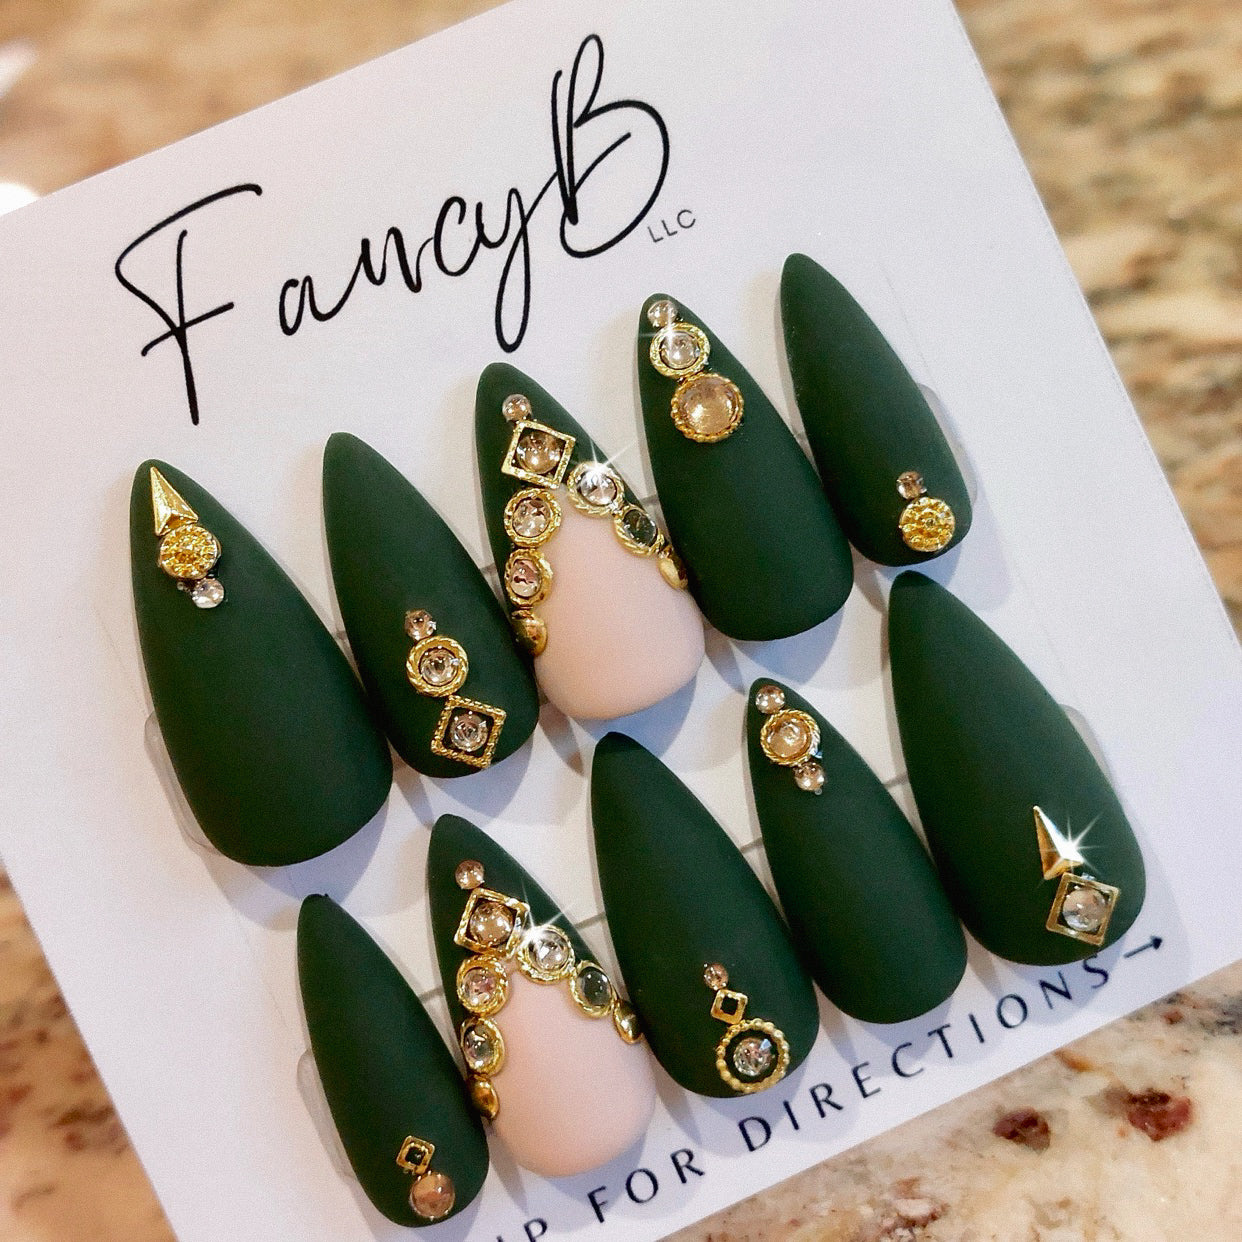 Custom press on nails - matte green with gold and champagne gems, v-french accent nail, gold decorative pieces and stiletto nail shape.